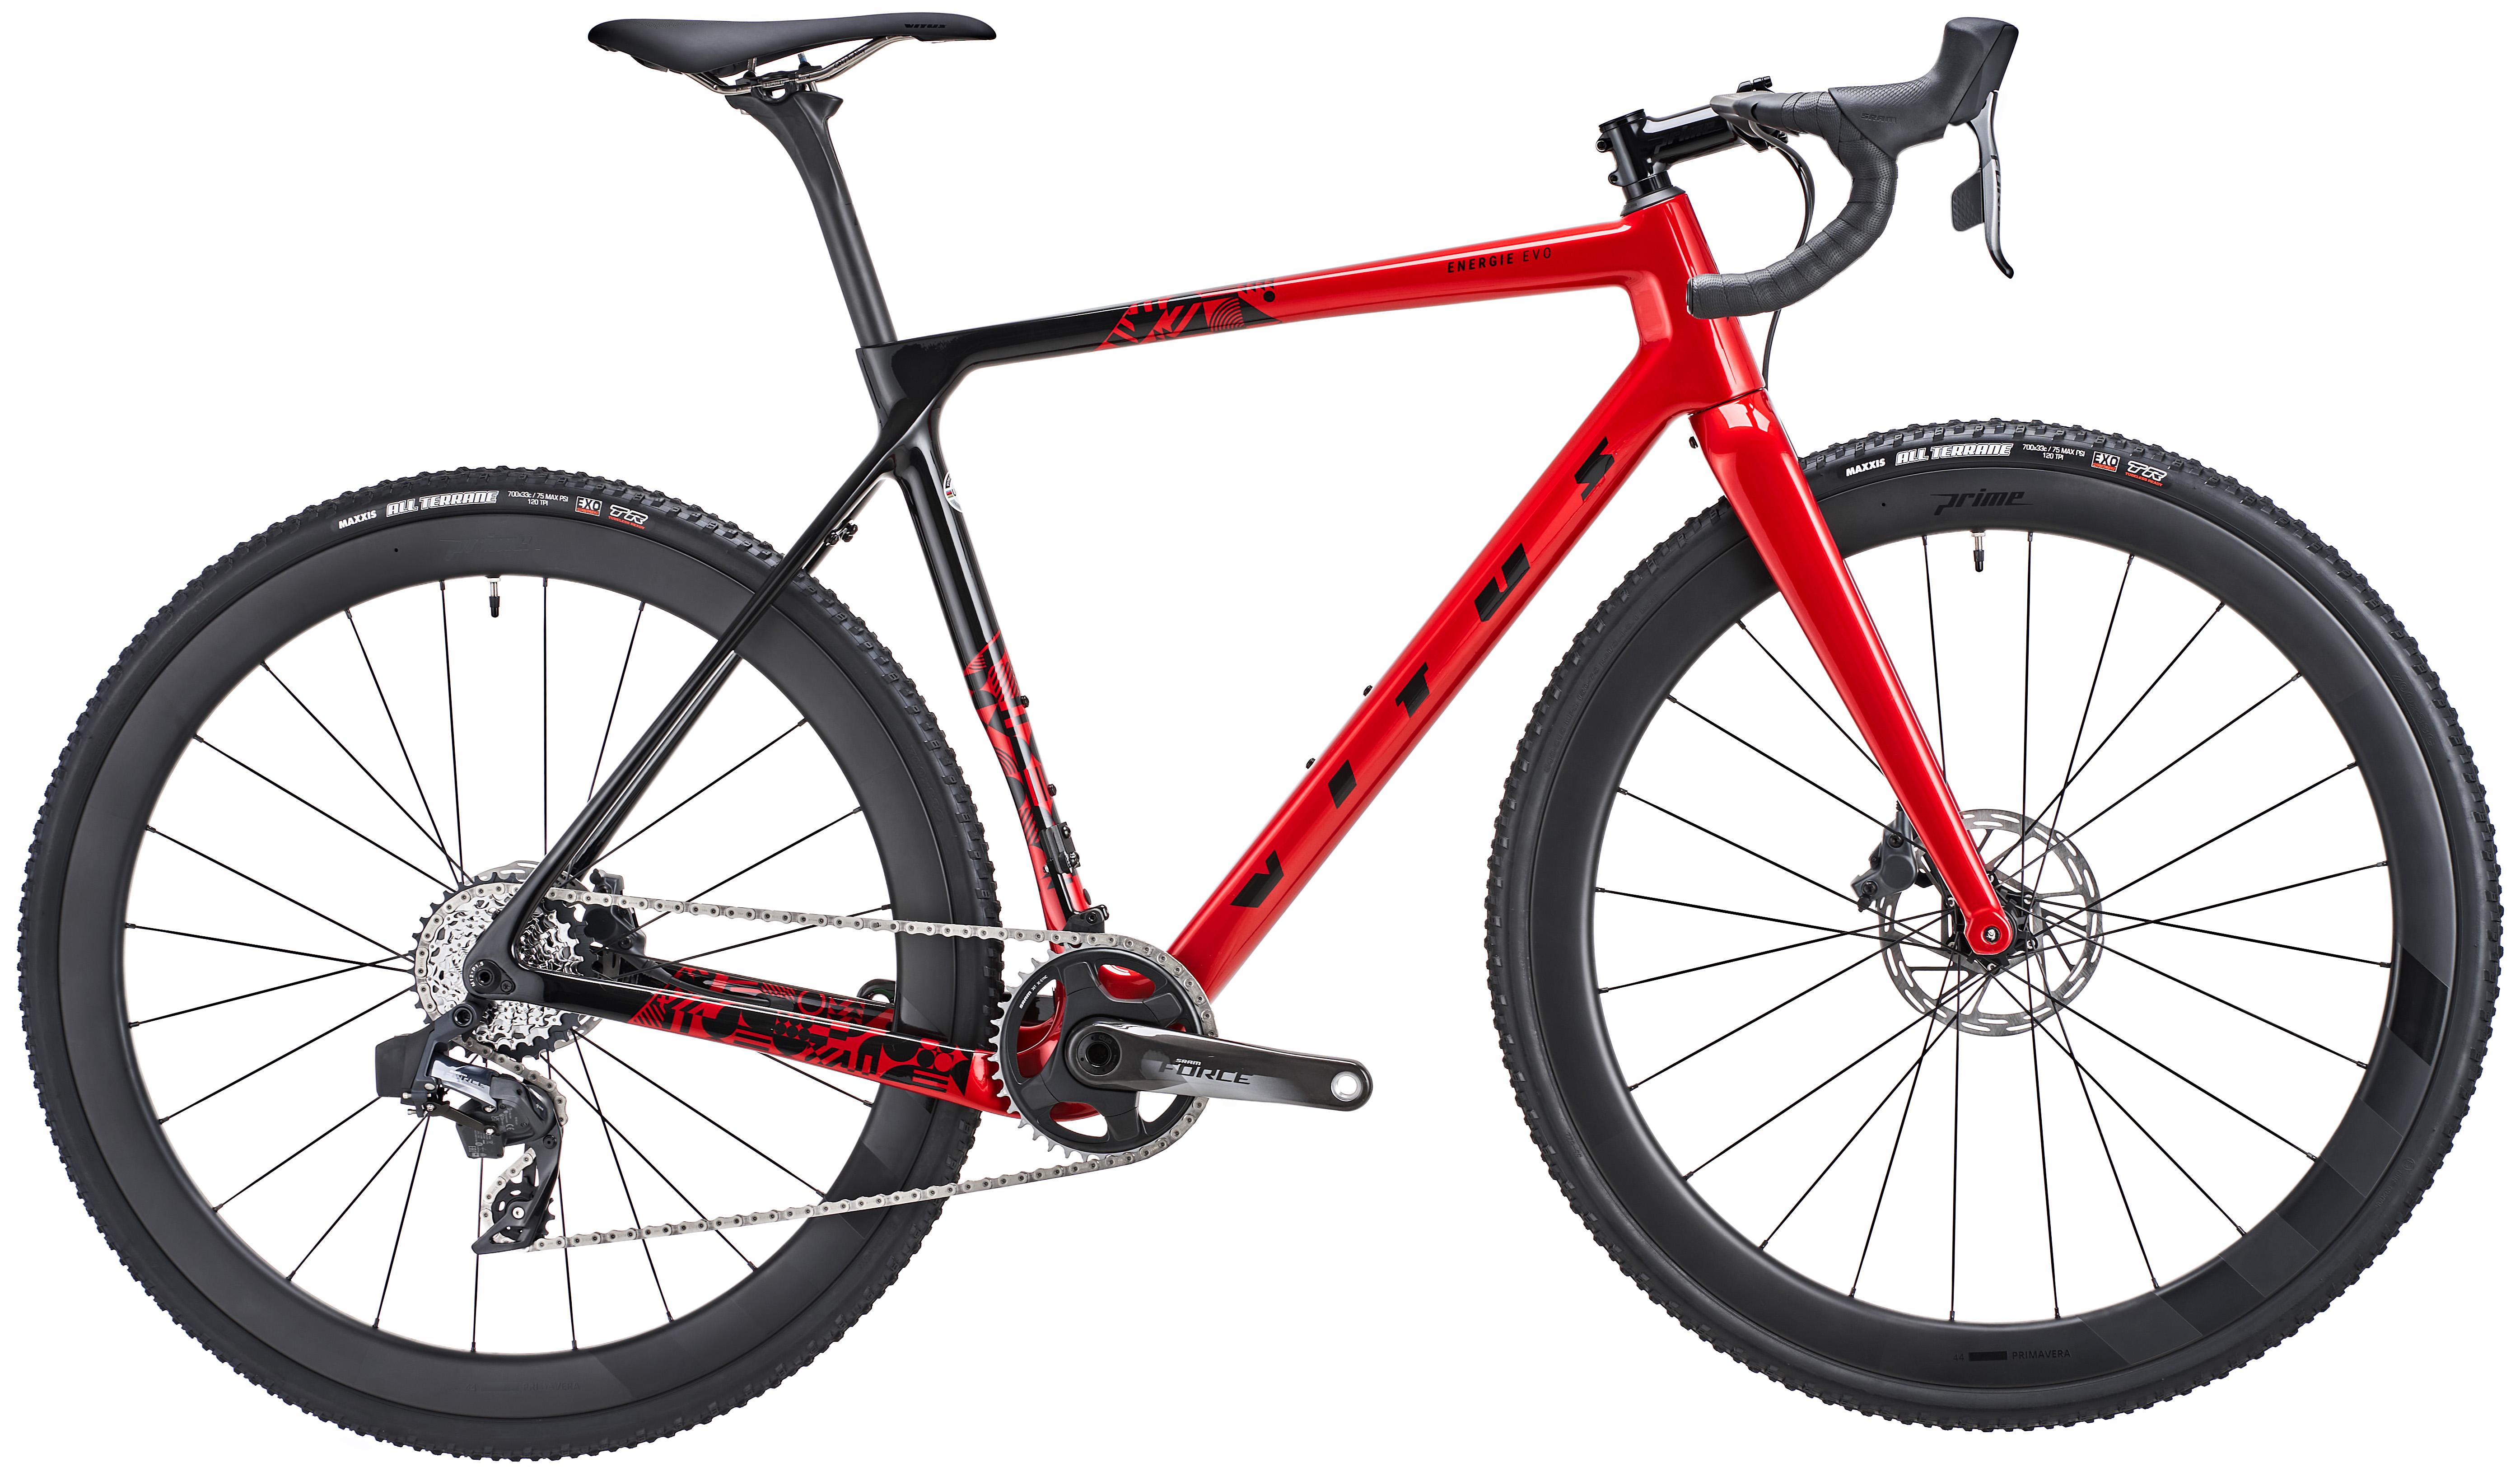 Vitus Energie Evo Force Axs Cyclocross Bike - Candy Red